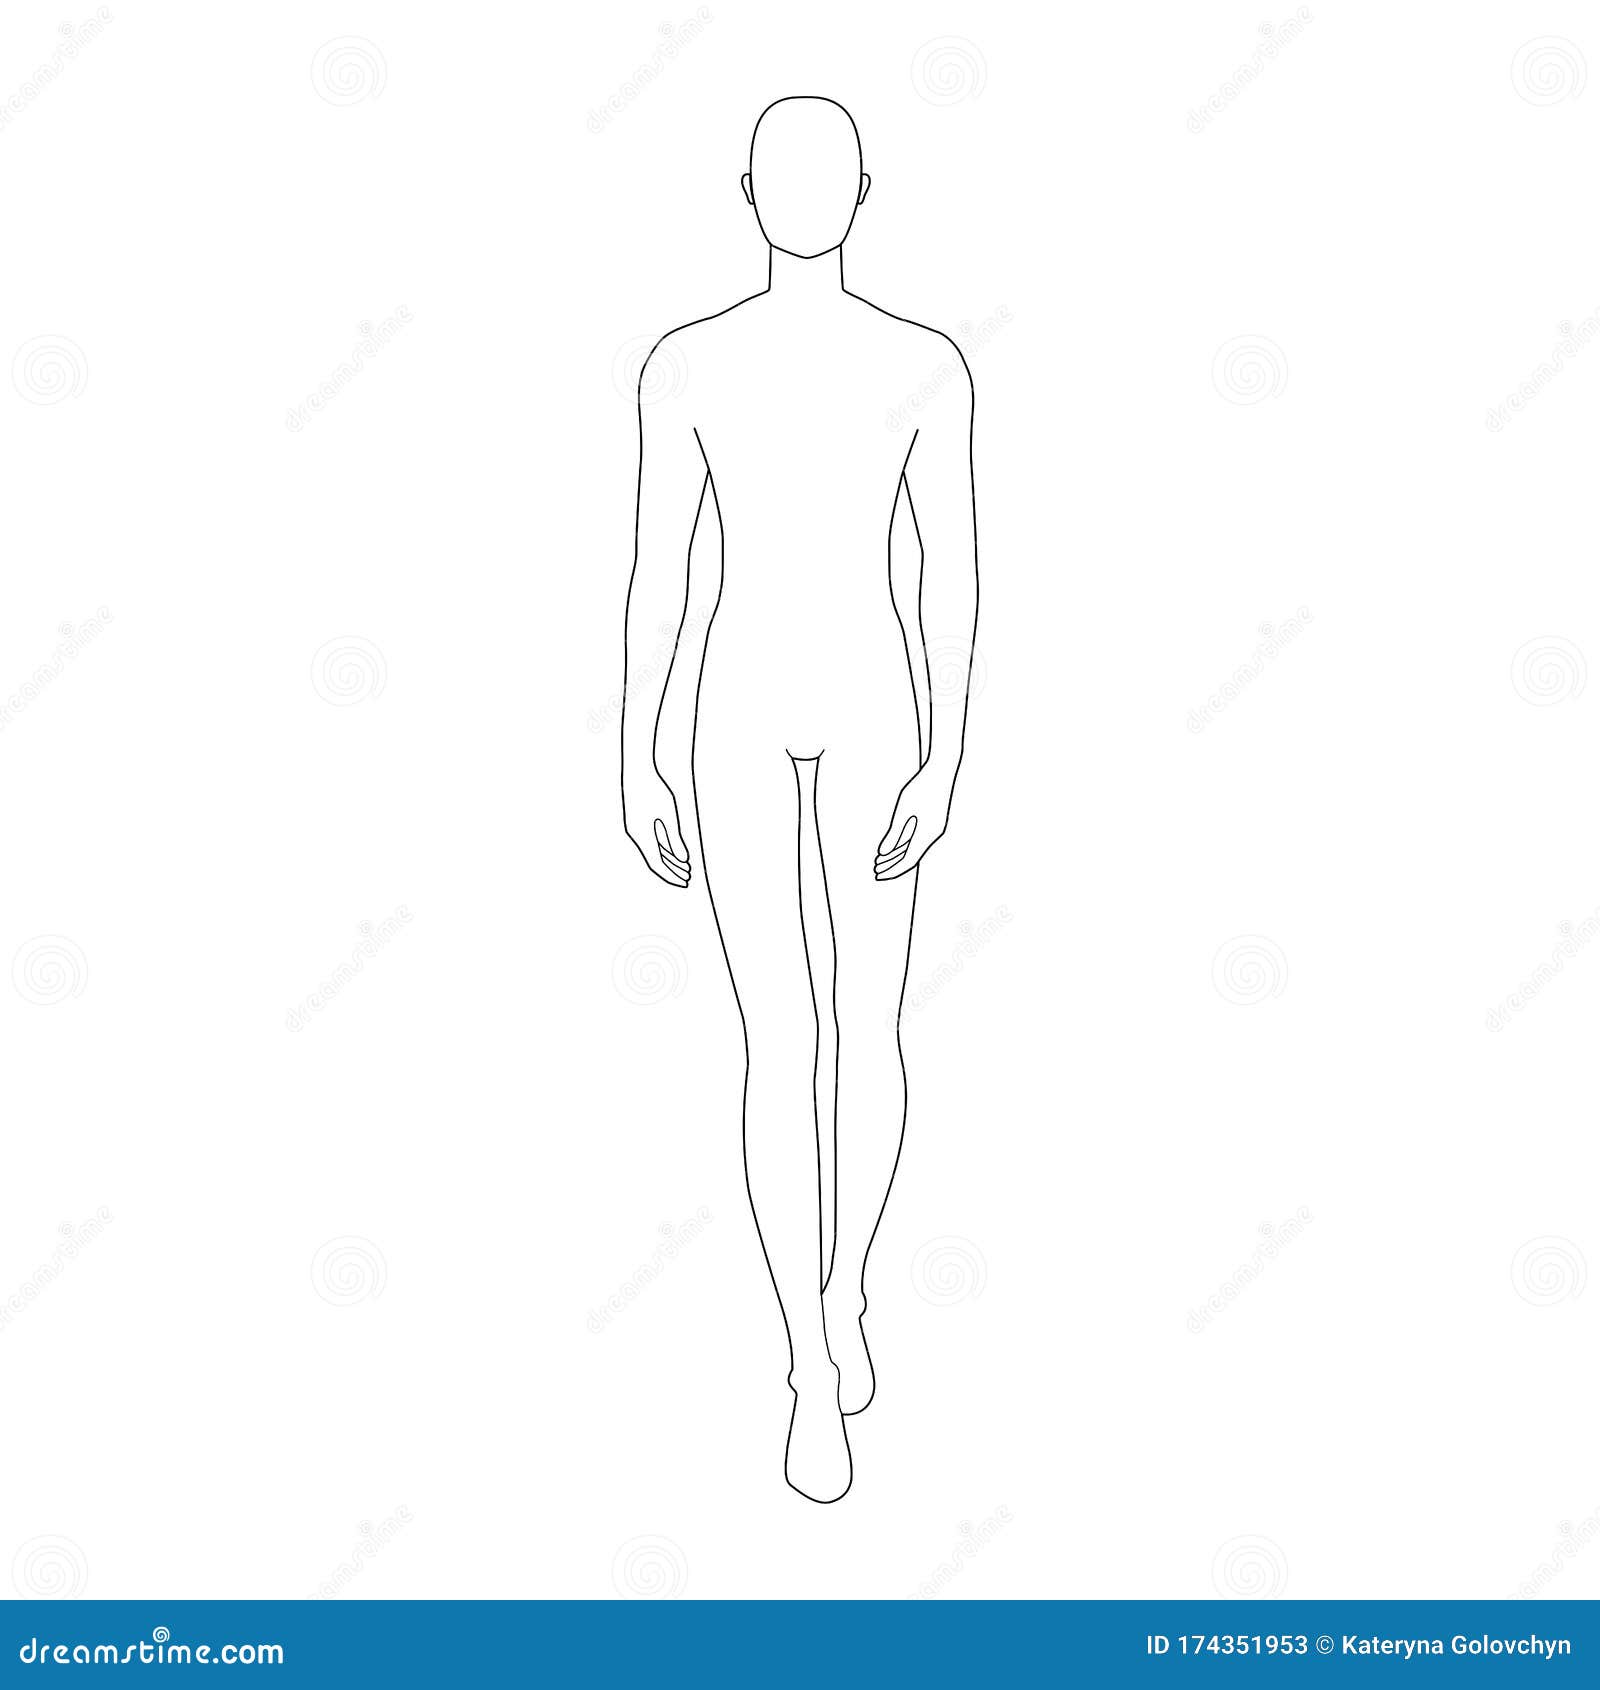 Premium Vector | Continuous line of a man walking simple vector illustration